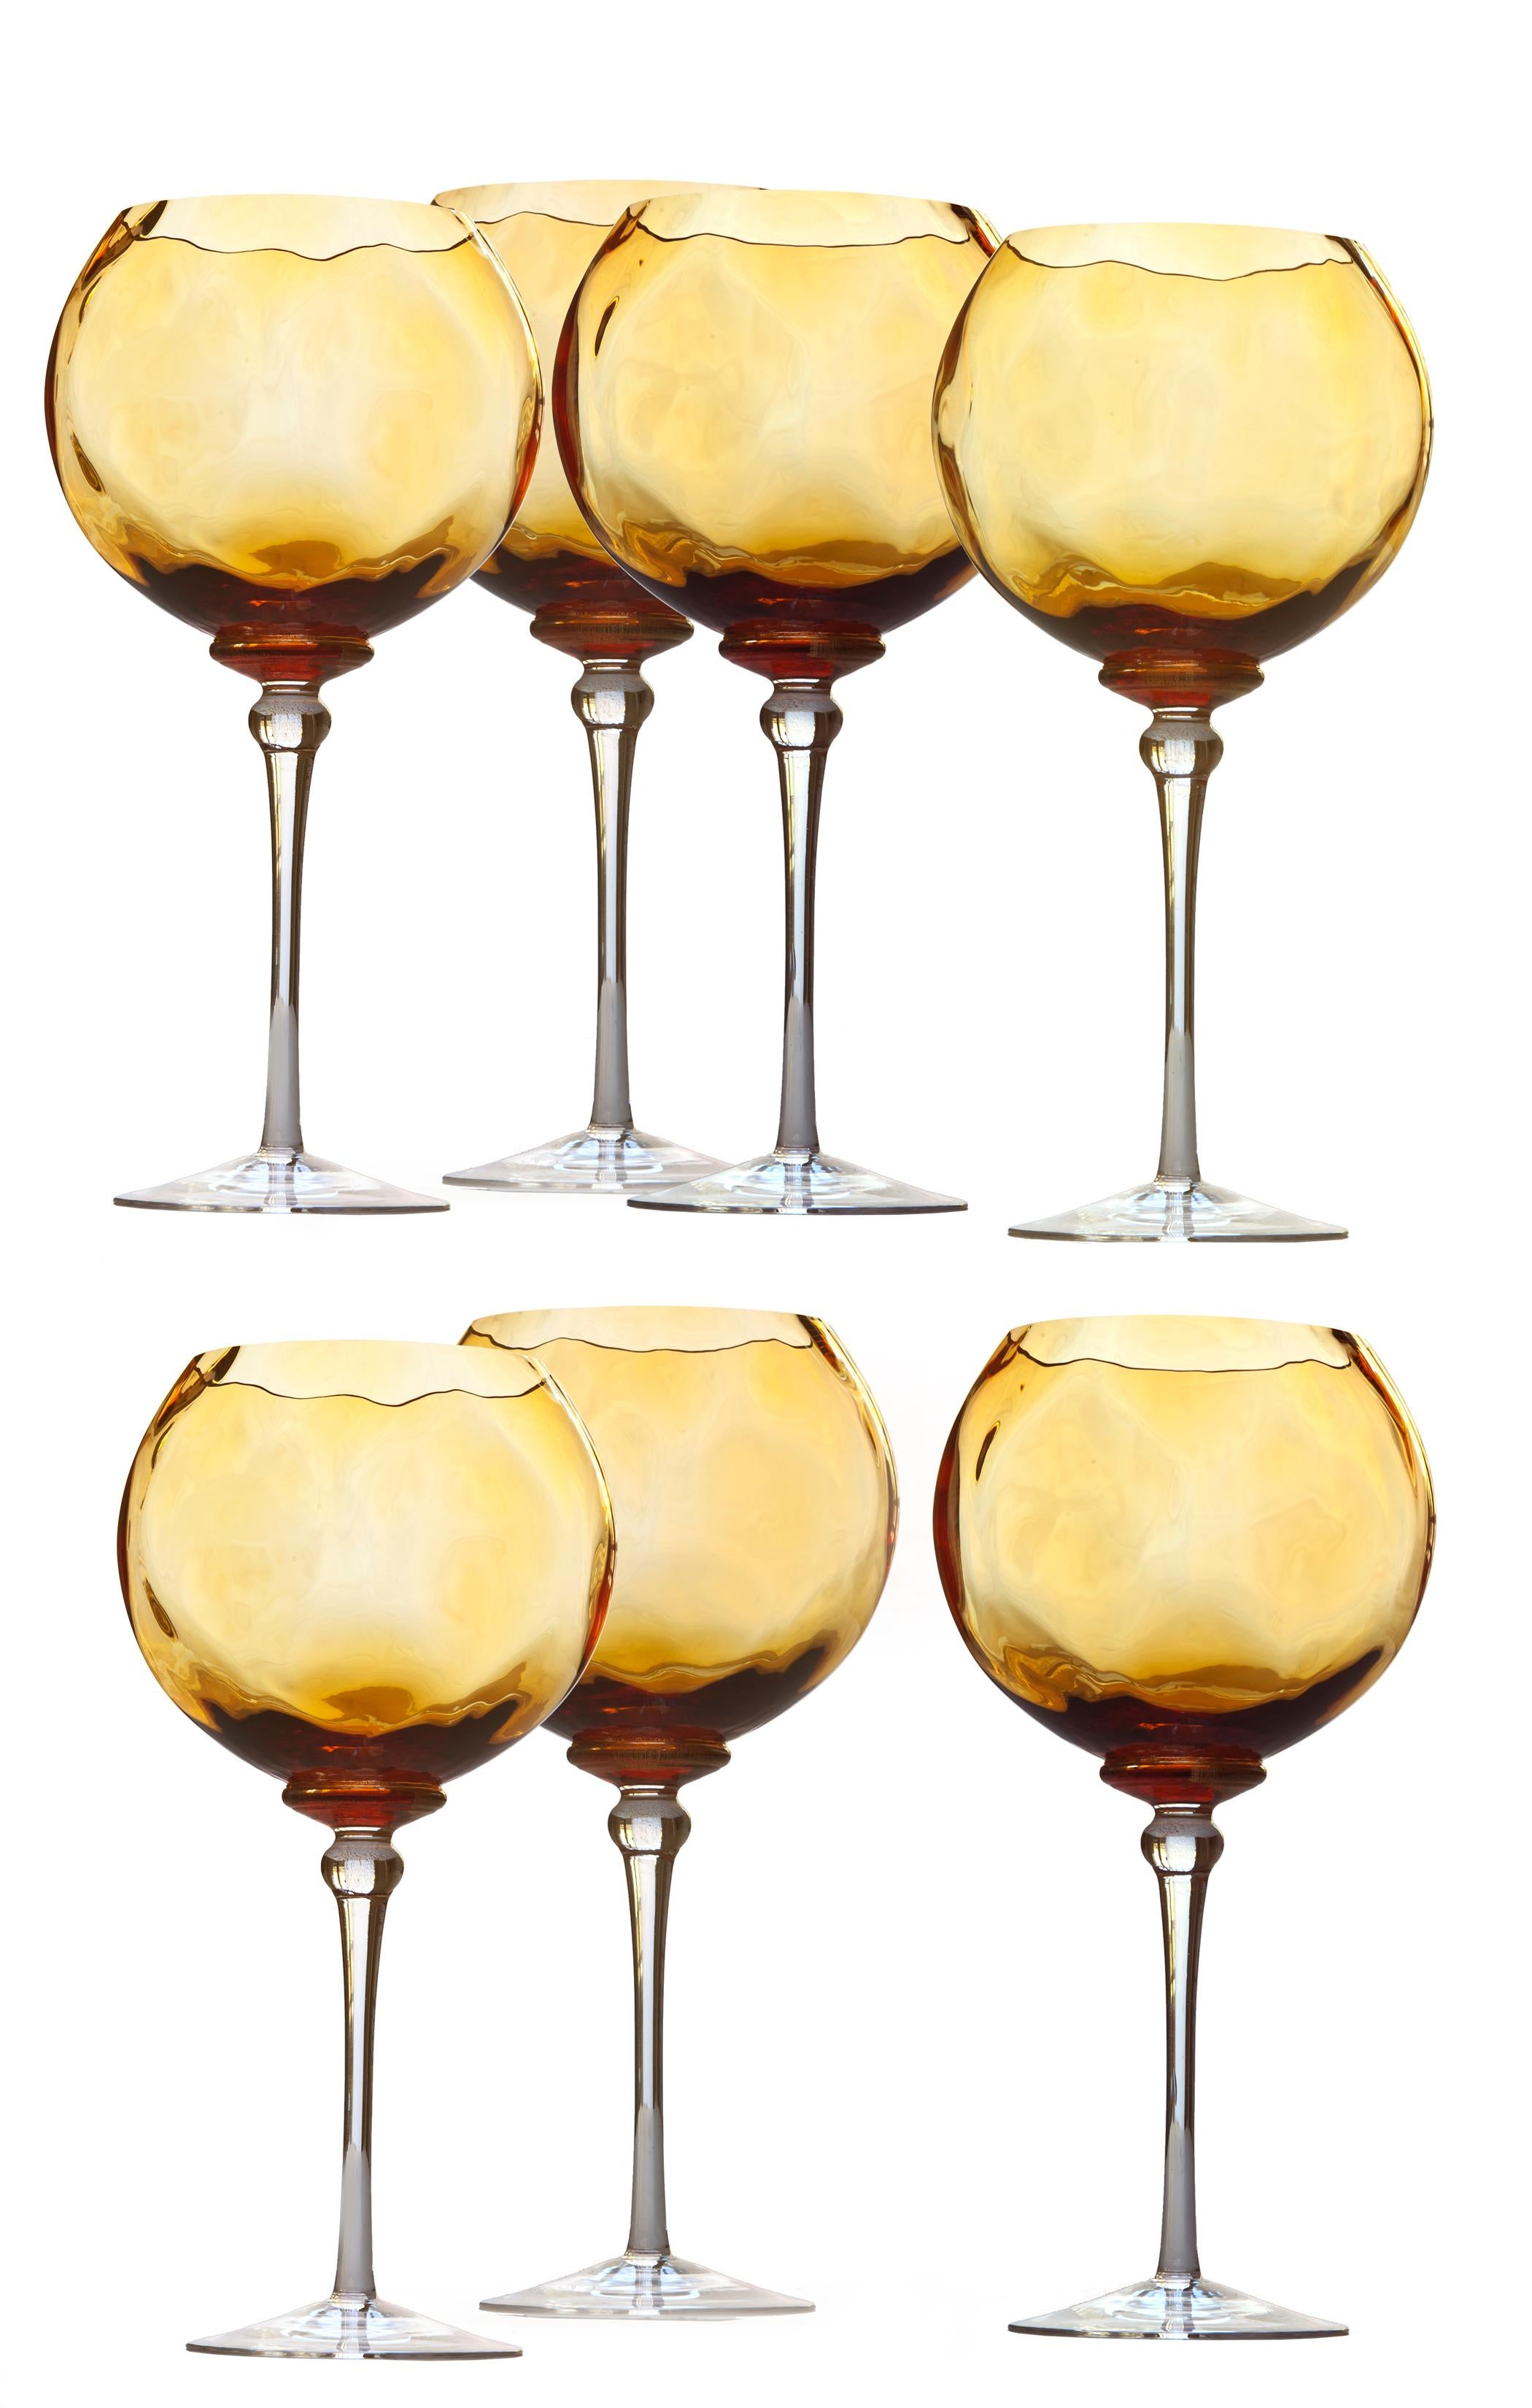 Striking set of 7 red wine goblets are made from beautiful hand-blown amber glass. Extra large globes make a stunning statement on any table, and feature an undulating pattern with gold leaf accents at the base. Clear stems. Each glass has been